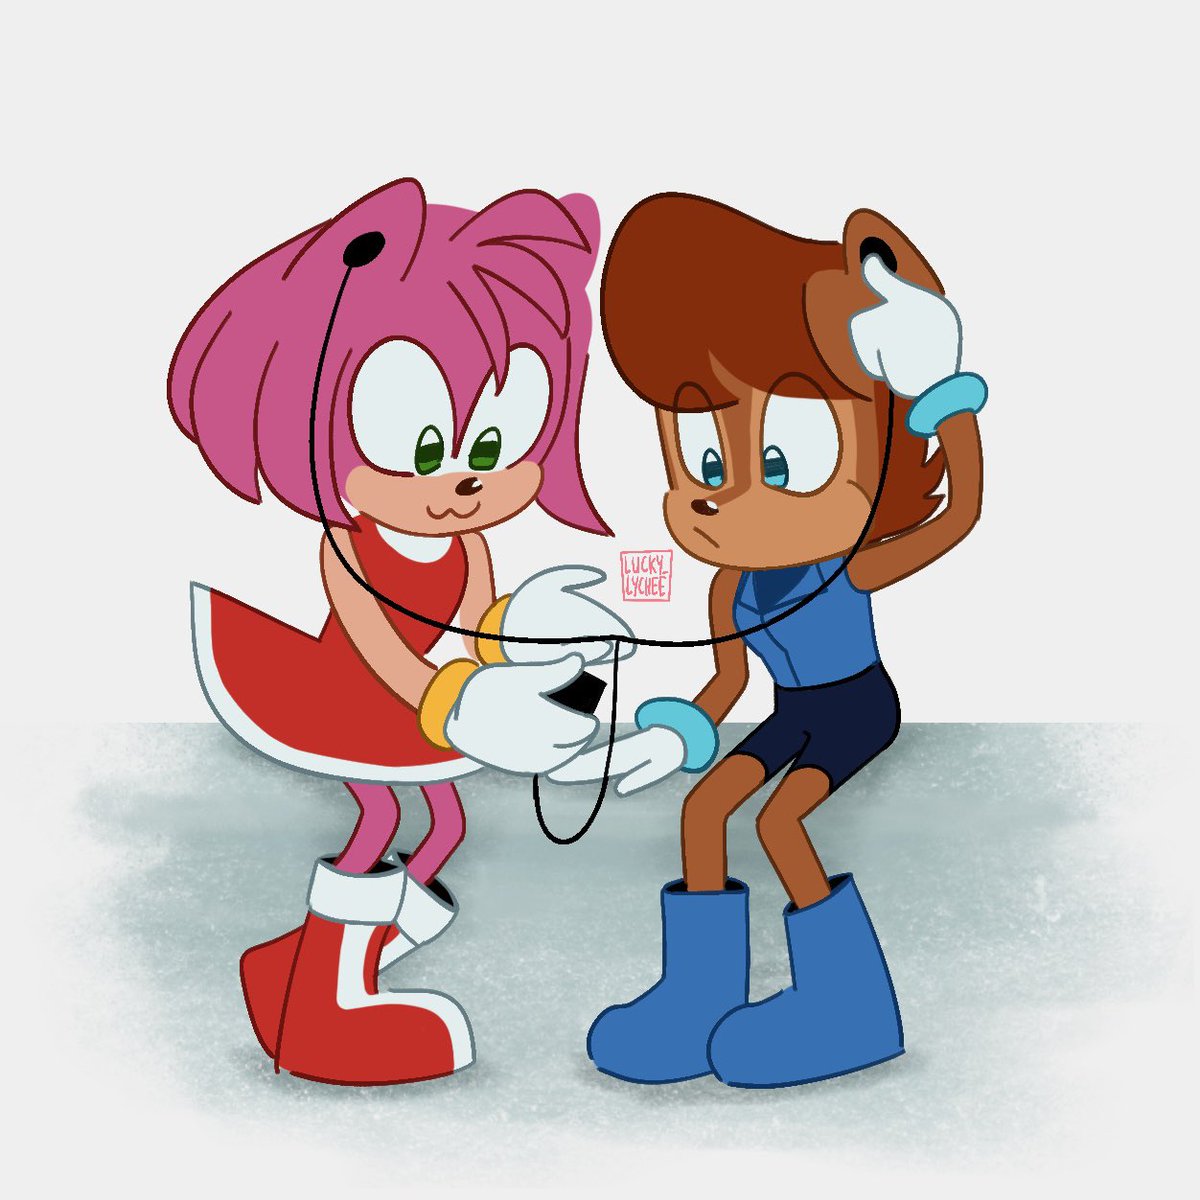 I just think they’re neat :3

What are they listening to? 🤔🤔

#SallyAcorn #Rally4Sally #AmyRose #SonicTheHedgehog #SonicFanArt